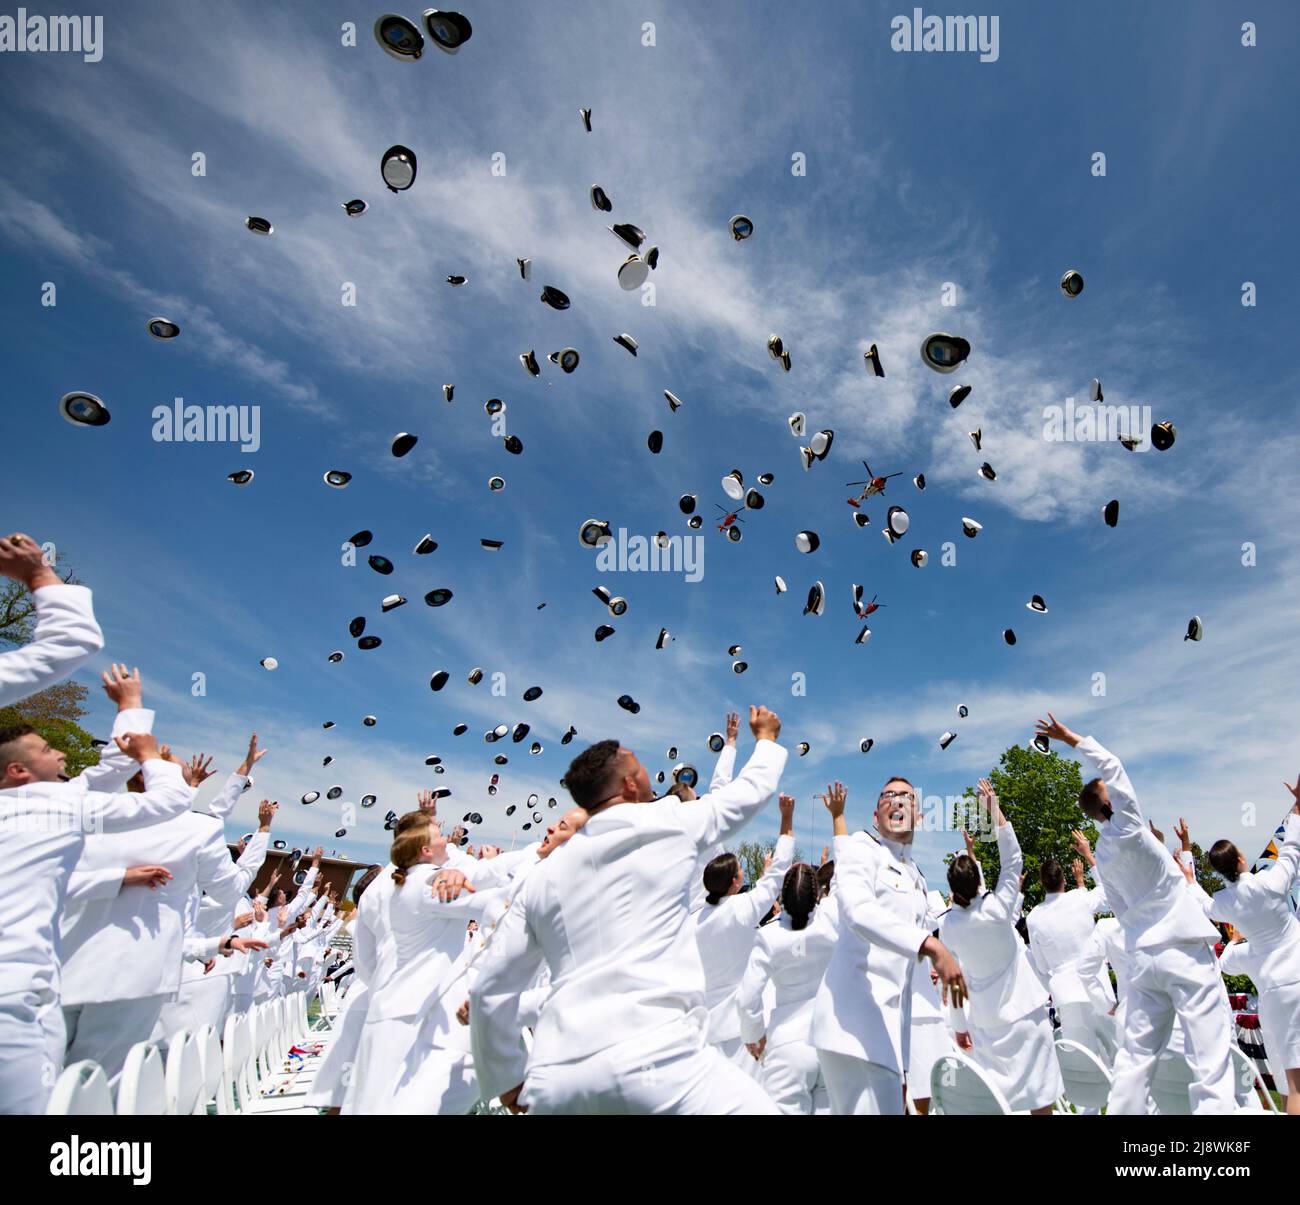 New London, United States of America. 18 May, 2022. U.S. Coast Guard Academy graduates toss their hats into the air to celebrate the conclusion of the 141st Commencement Ceremony at the Coast Guard Academy, May 18, 2022 in New London, Connecticut. The Coast Guard Academy graduated 252 new officers along with nine international students. Credit: PO3 Matthew Thieme/U.S. Coast Guard Photo/Alamy Live News Stock Photo